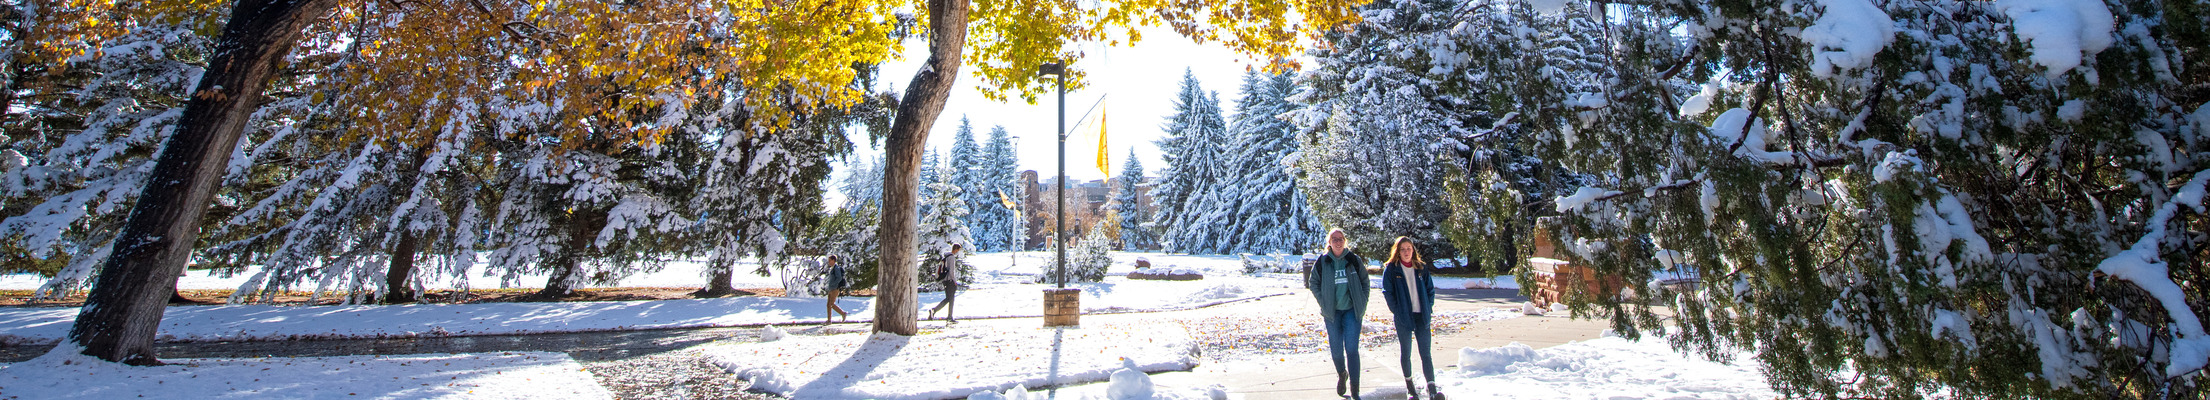 Students outside on campus in winter.